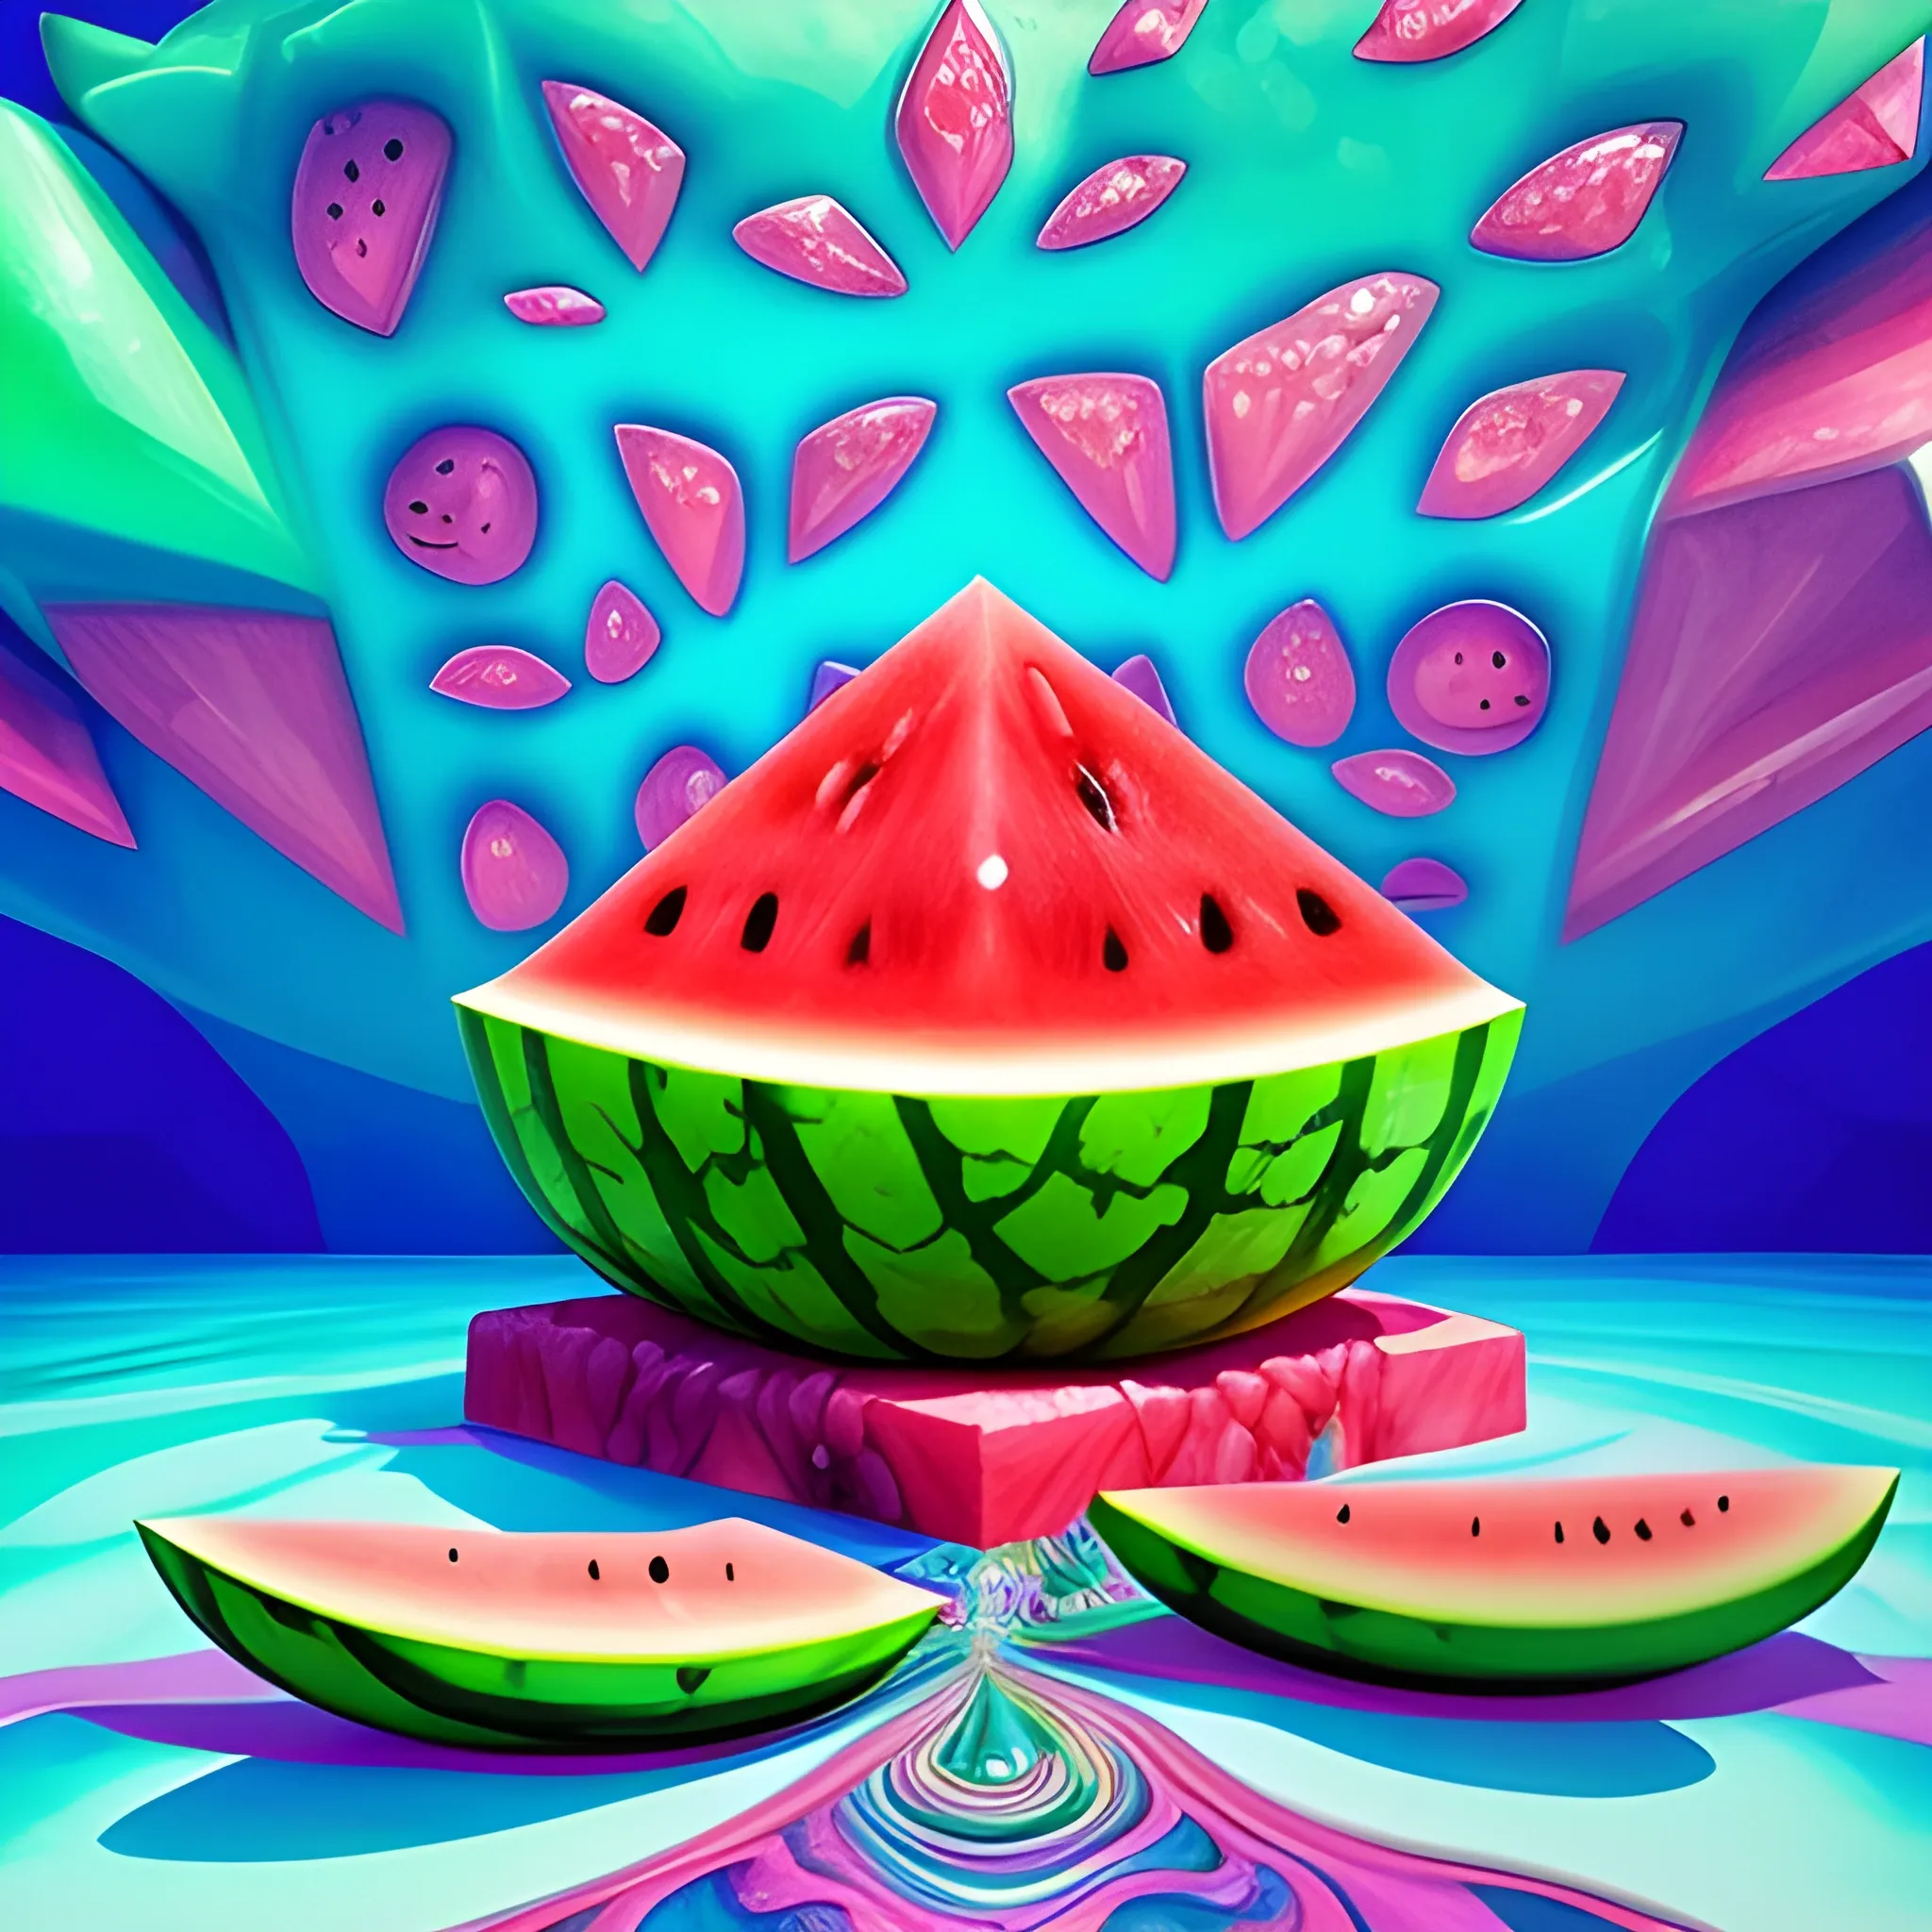 make a crystal statue of many crazy watermelon look like whimsical female human face, close up, saturated colors, surrealism, chaotic background many watermelons and leaves floating around  3D, Trippy, eerie atmosphere, close up, illustration, angular perspective, Oil Painting, Water Color